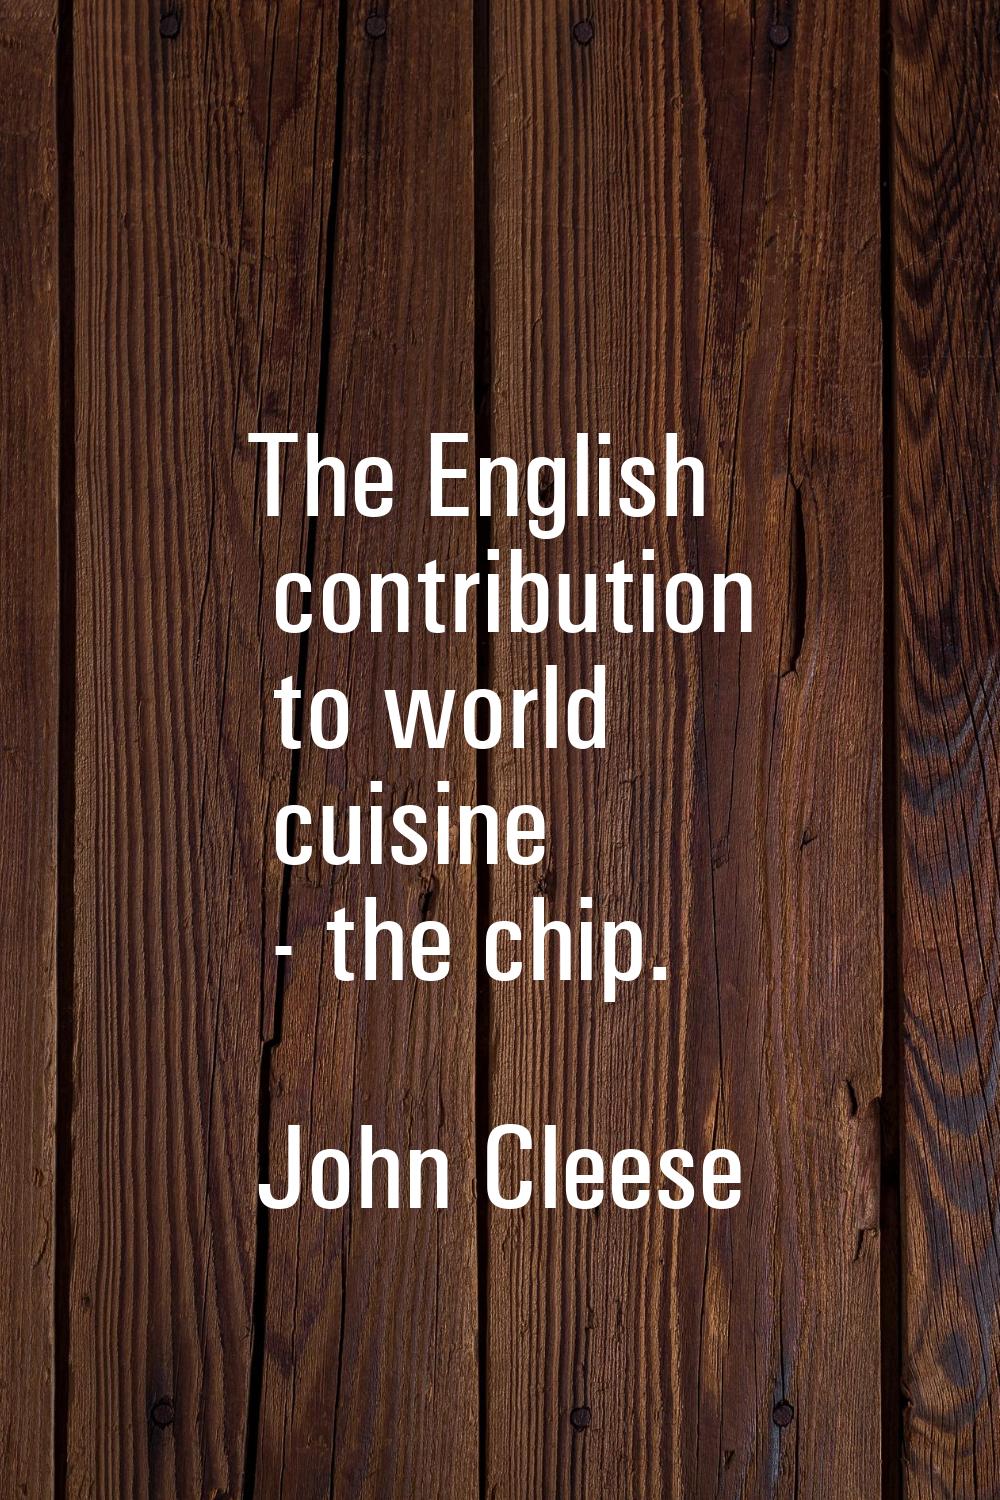 The English contribution to world cuisine - the chip.